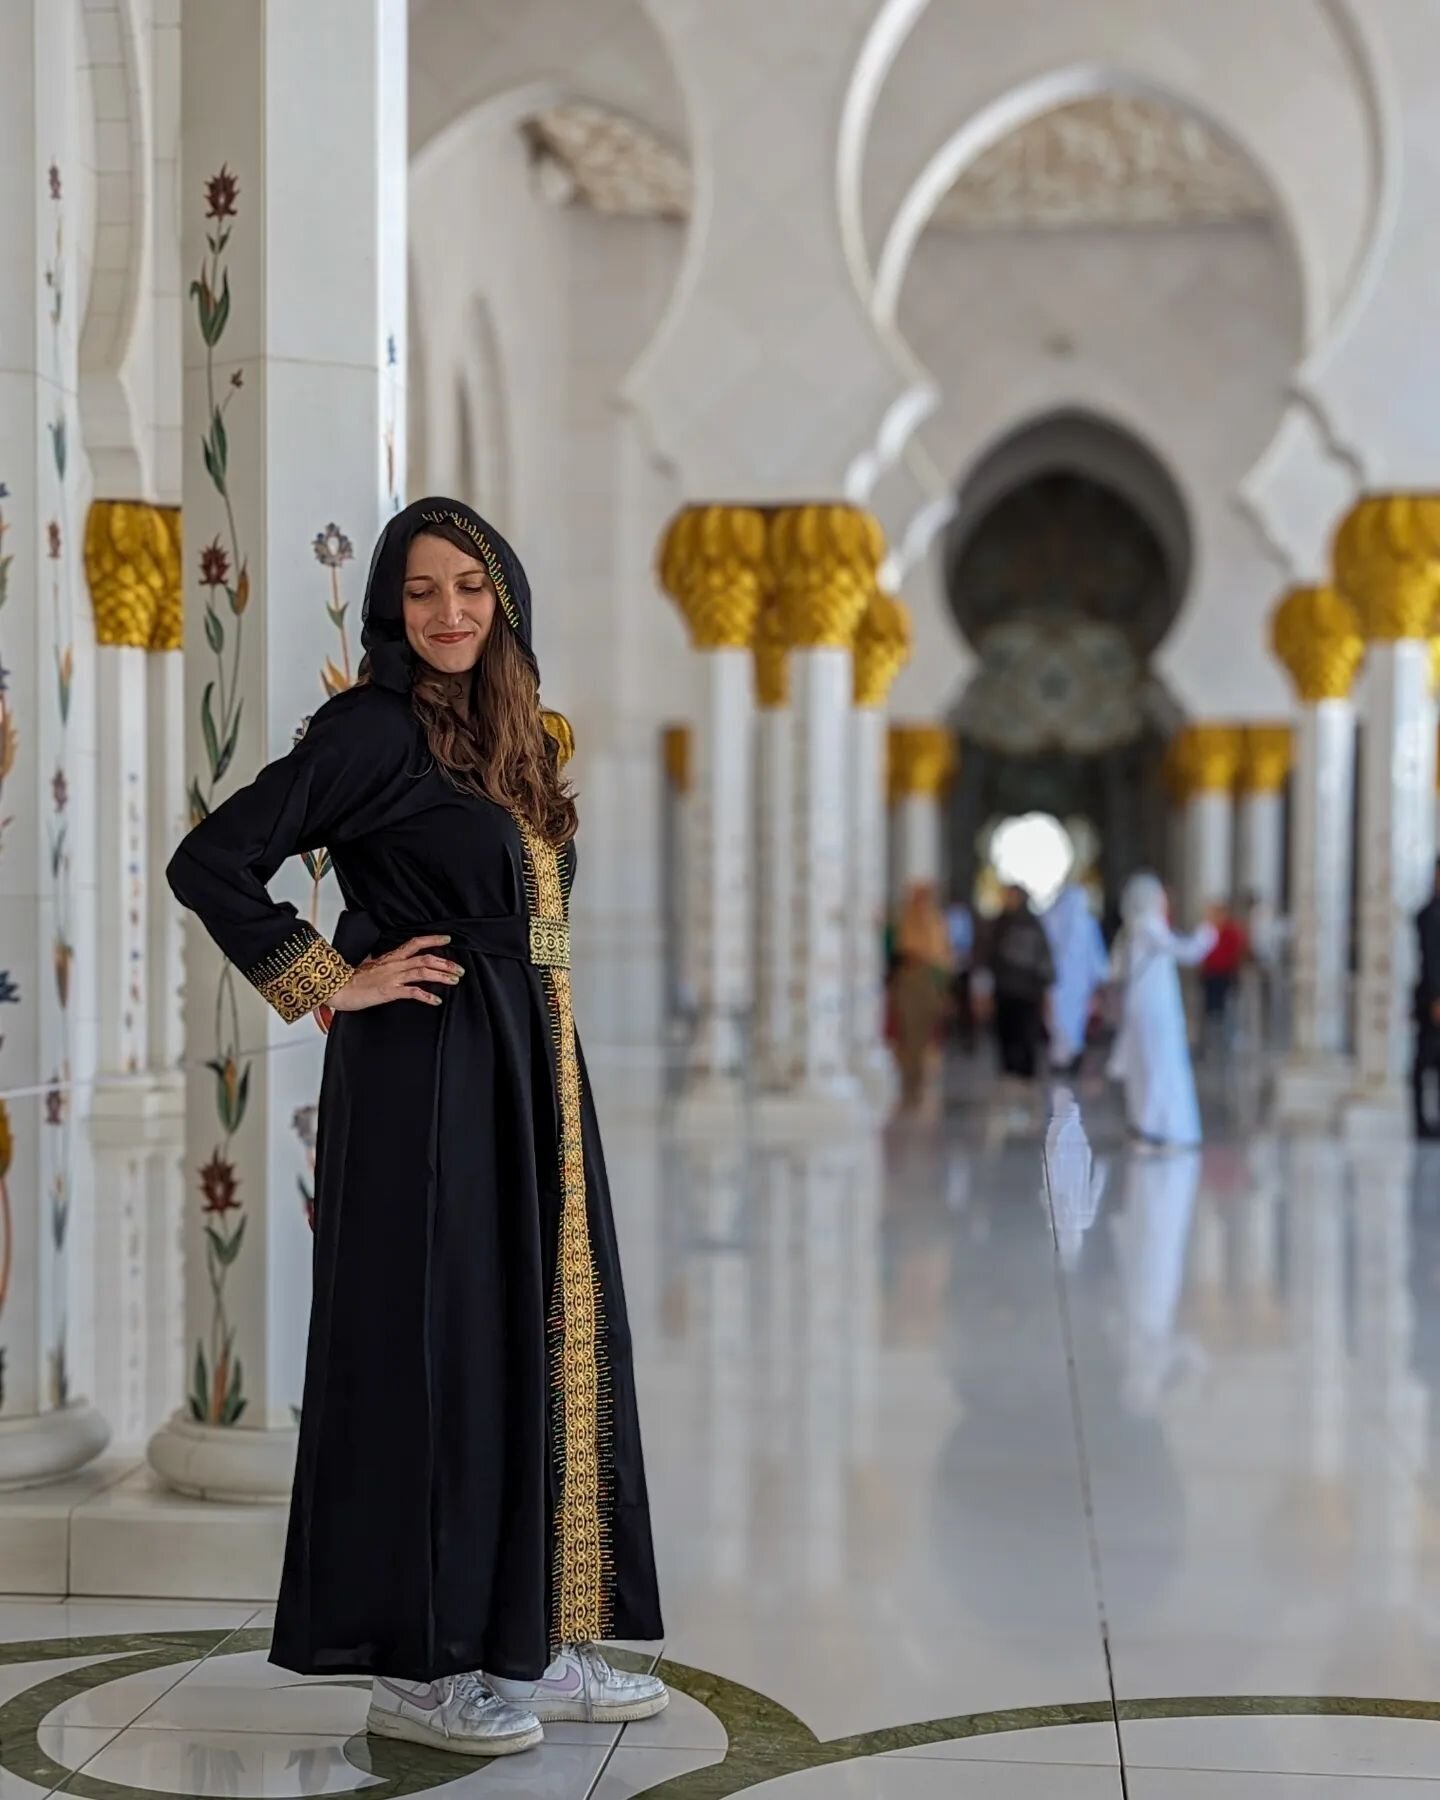 Just a princess in sneakers 💅👟

Any girls heading to Abu Dhabi should know a few things before going to Sheikh Zayed Grand Mosque. Many are tempted to buy an abaya - traditional dress - which I definitely encourage because they are beautiful!

But 